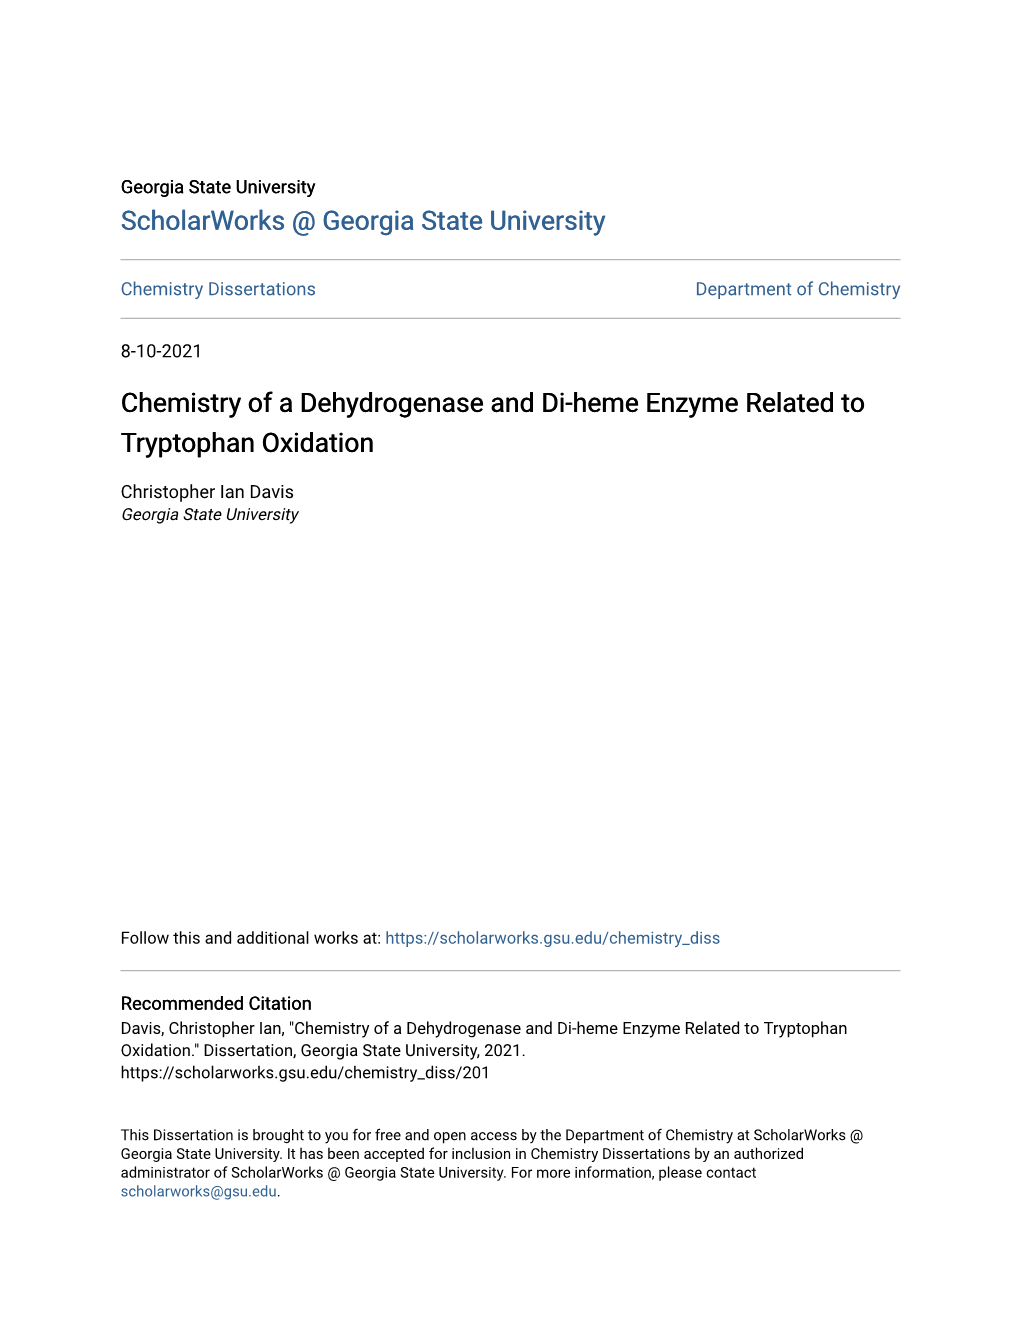 Chemistry of a Dehydrogenase and Di-Heme Enzyme Related to Tryptophan Oxidation